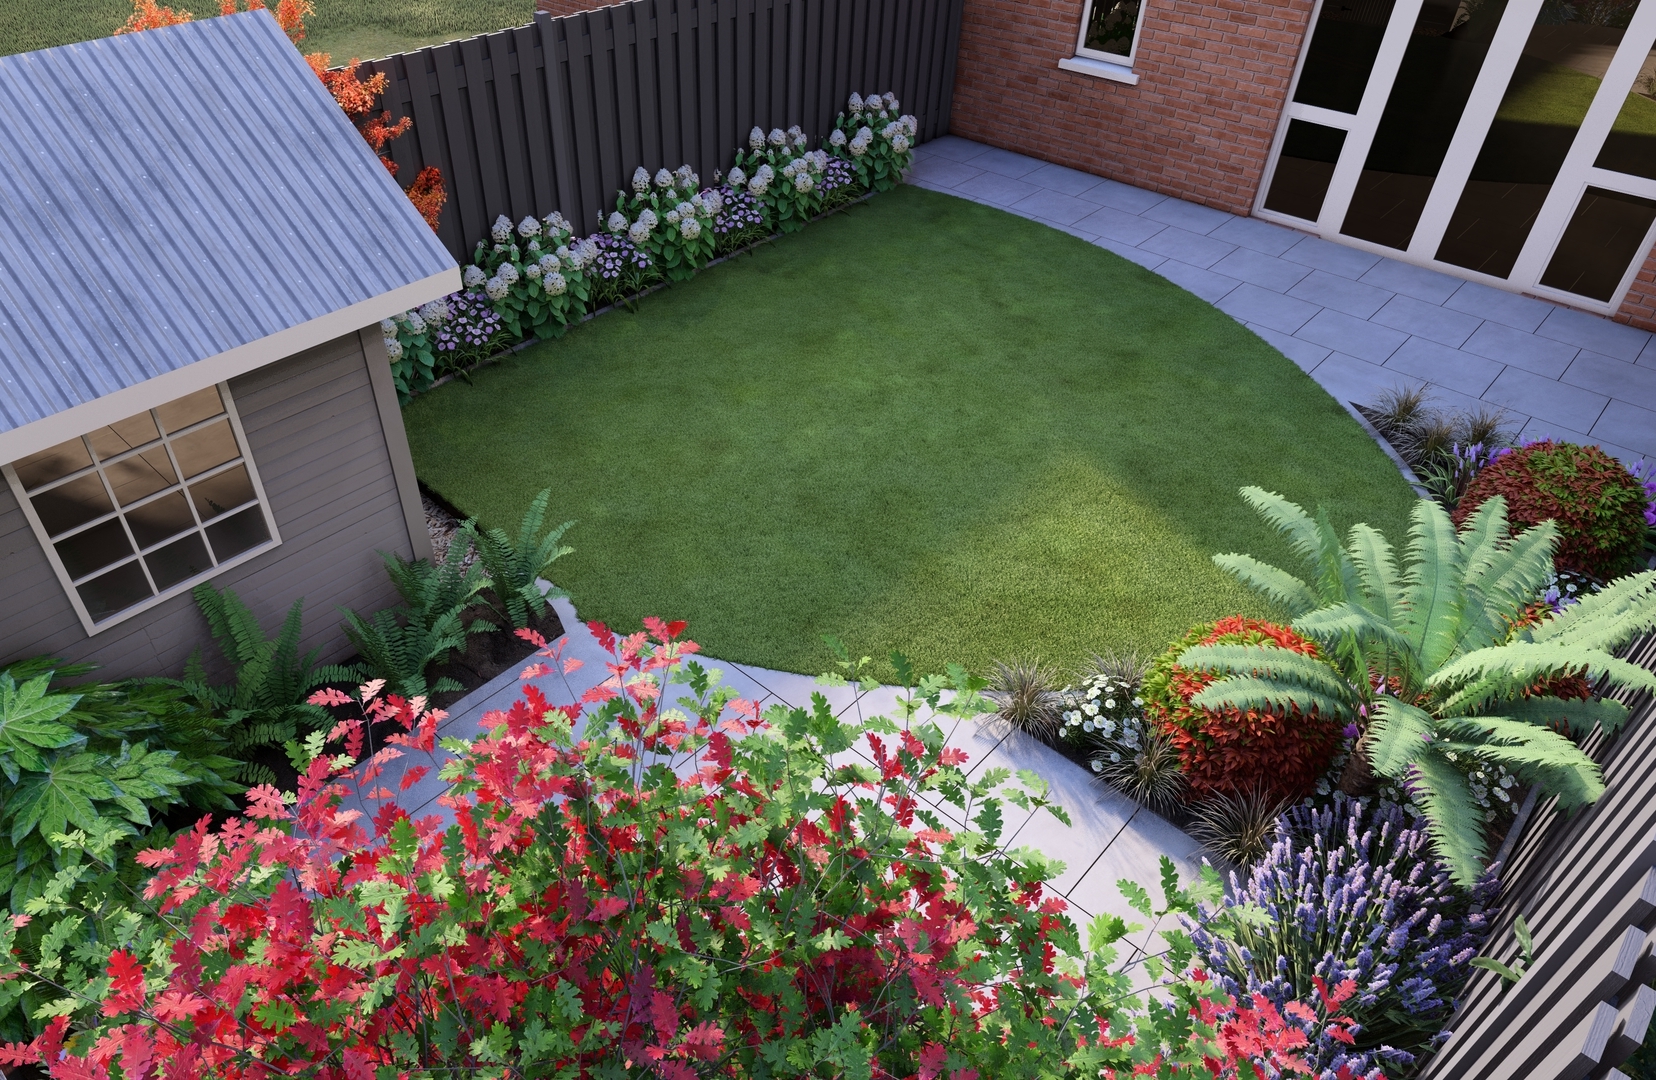 Garden Design Dublin 9 for a compact size family garden features natural limestone paving, bespoke horizontal slat fencing, artificial lawn, specimen trees & shrubs, and colourful mixed planted borders.